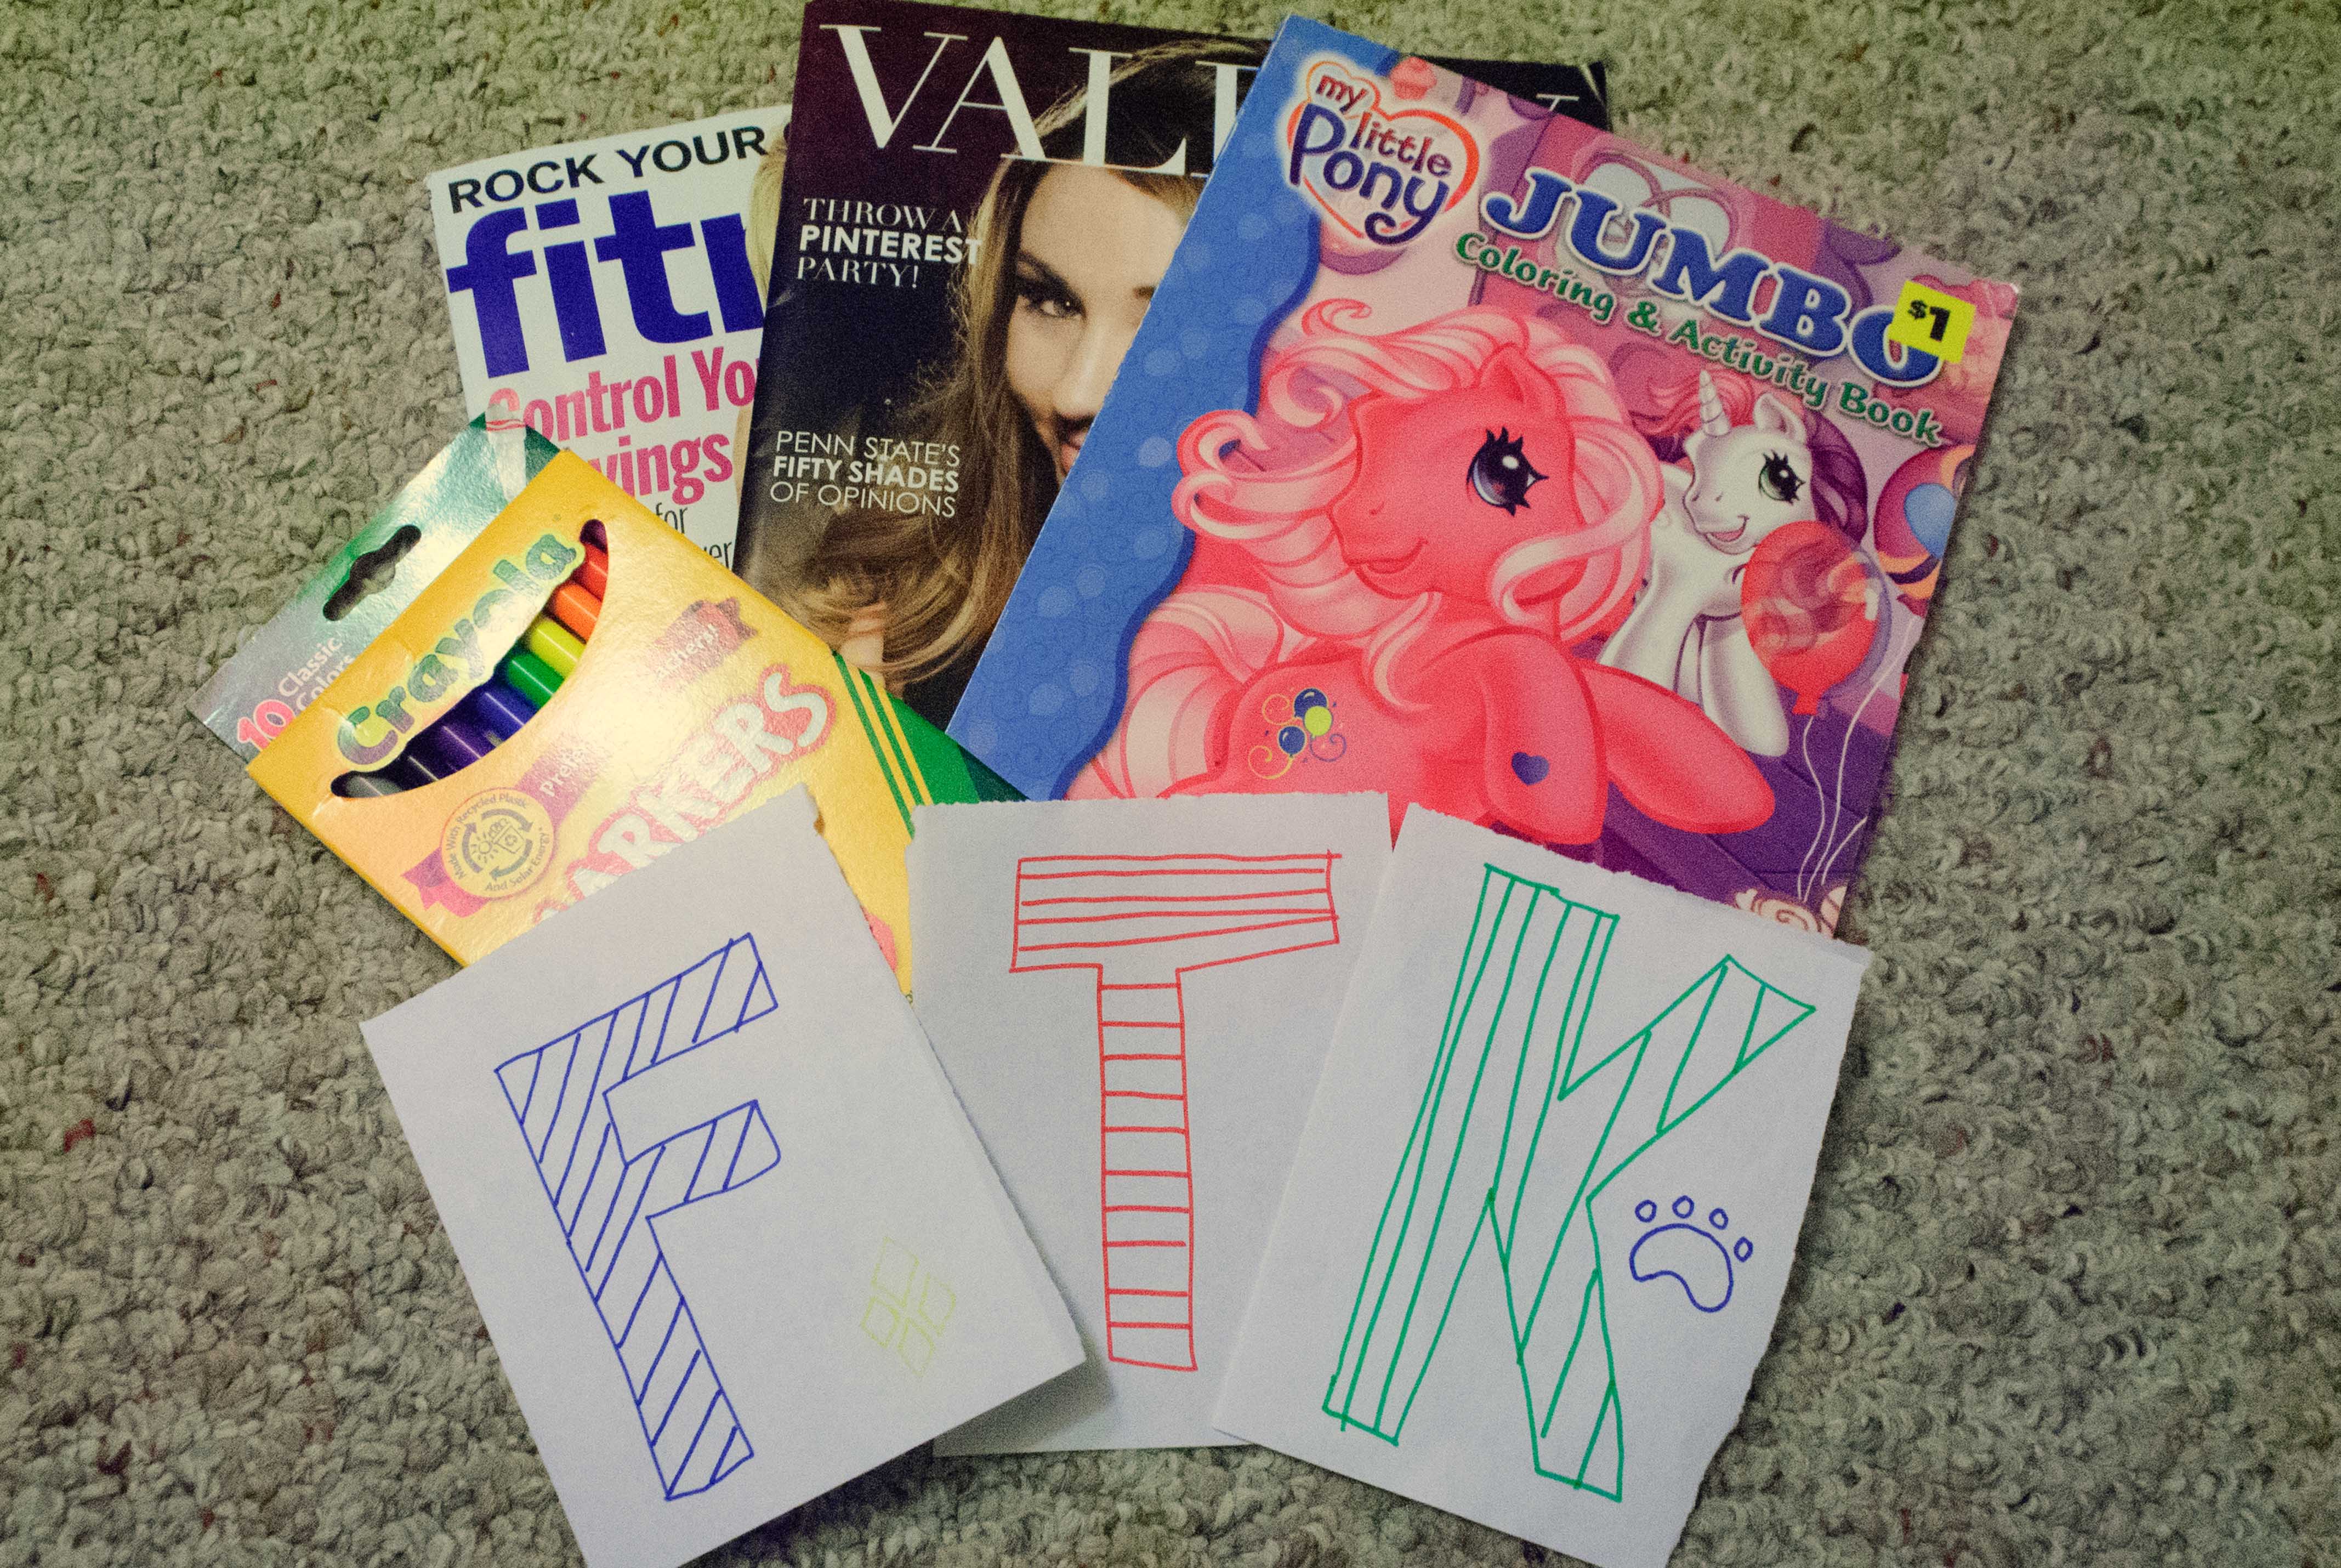 THON Dancer Mail Must-Haves